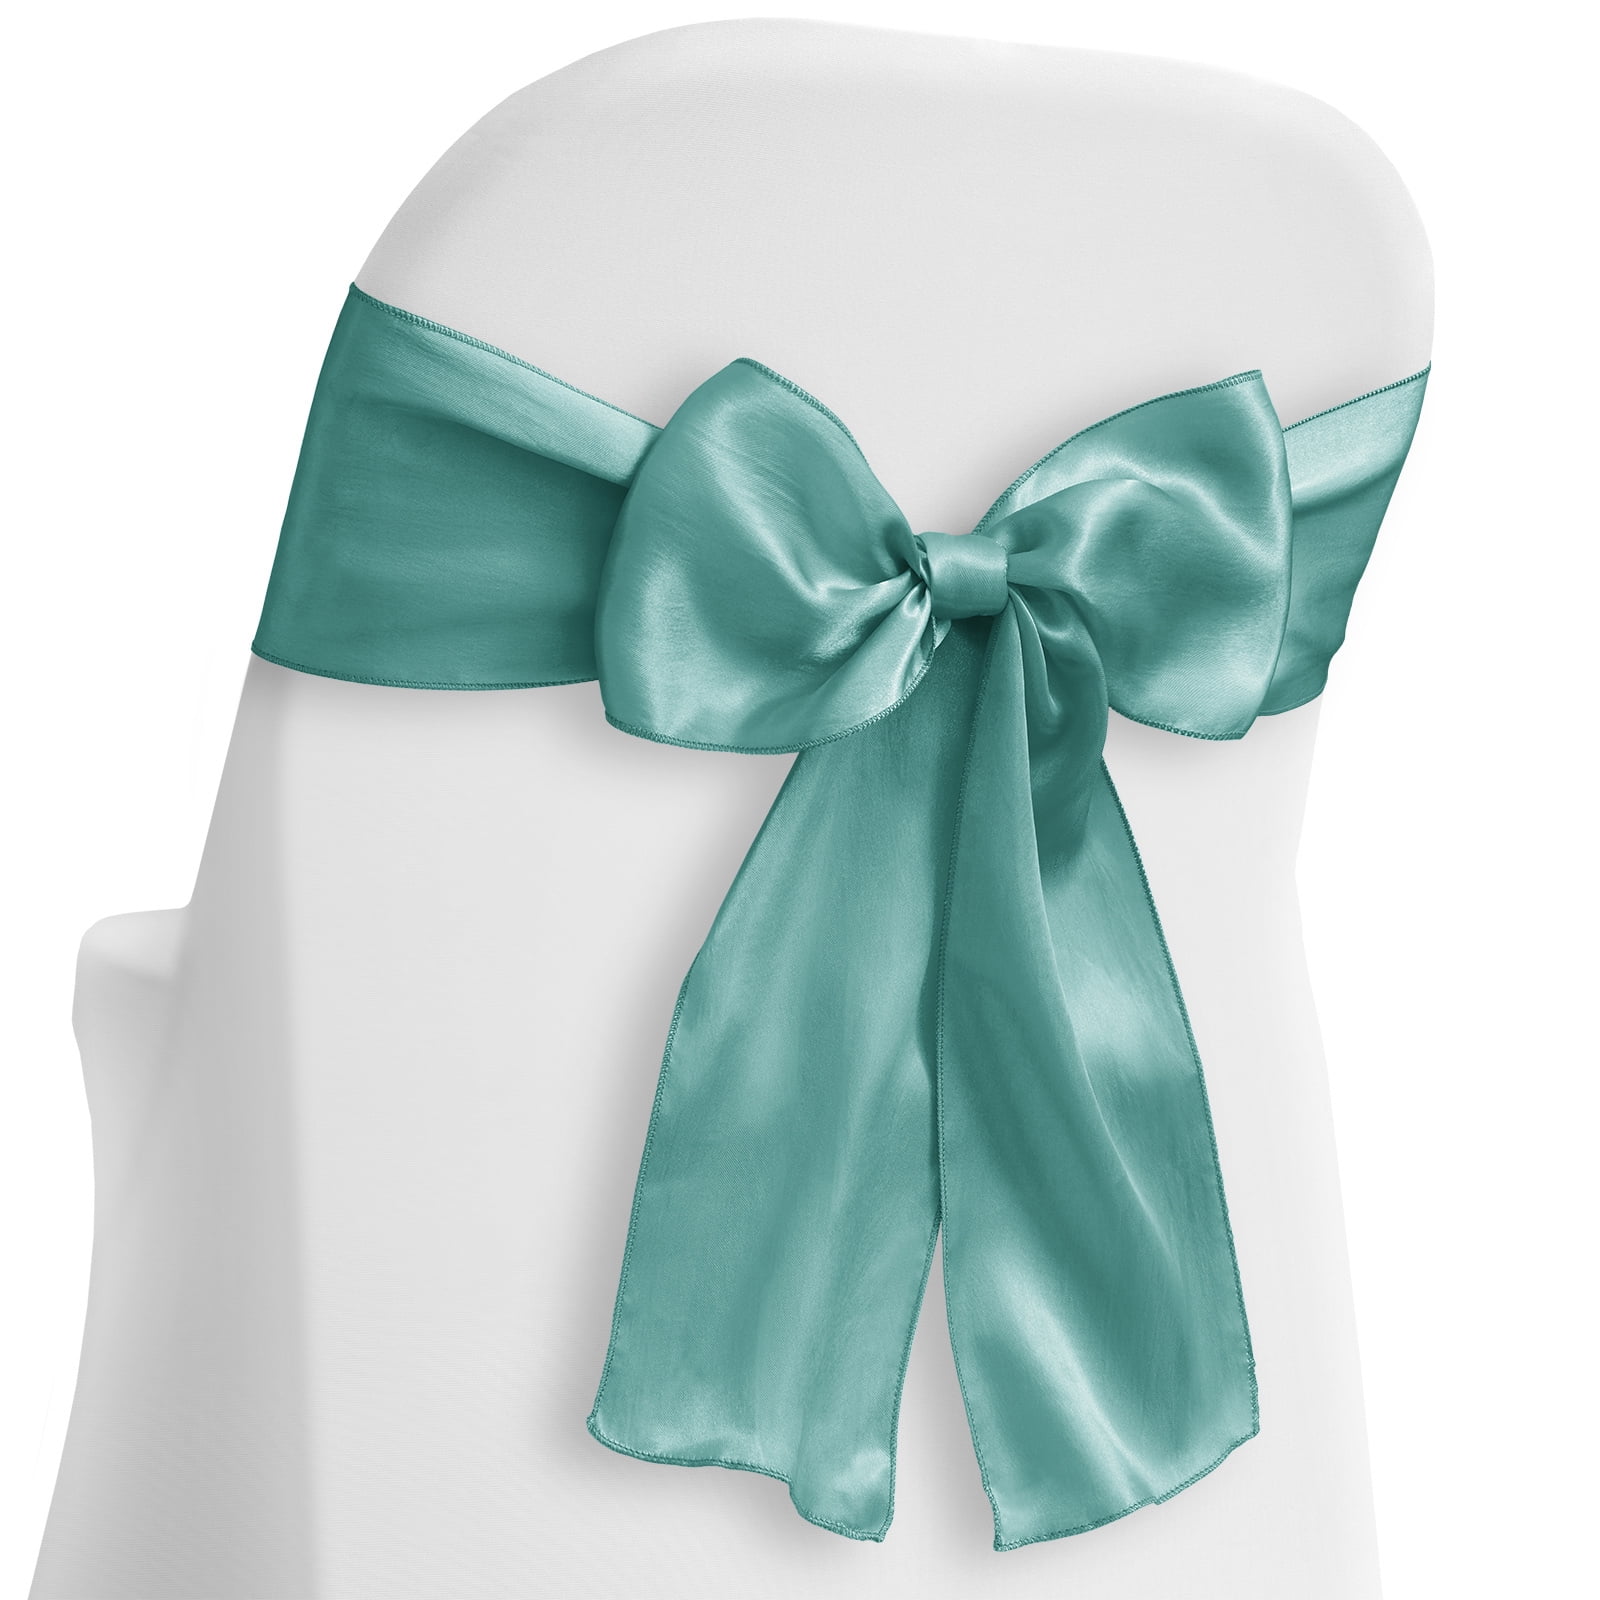 turquoise satin chair sashes tie chair bows ribbons wedding birthday party decor 